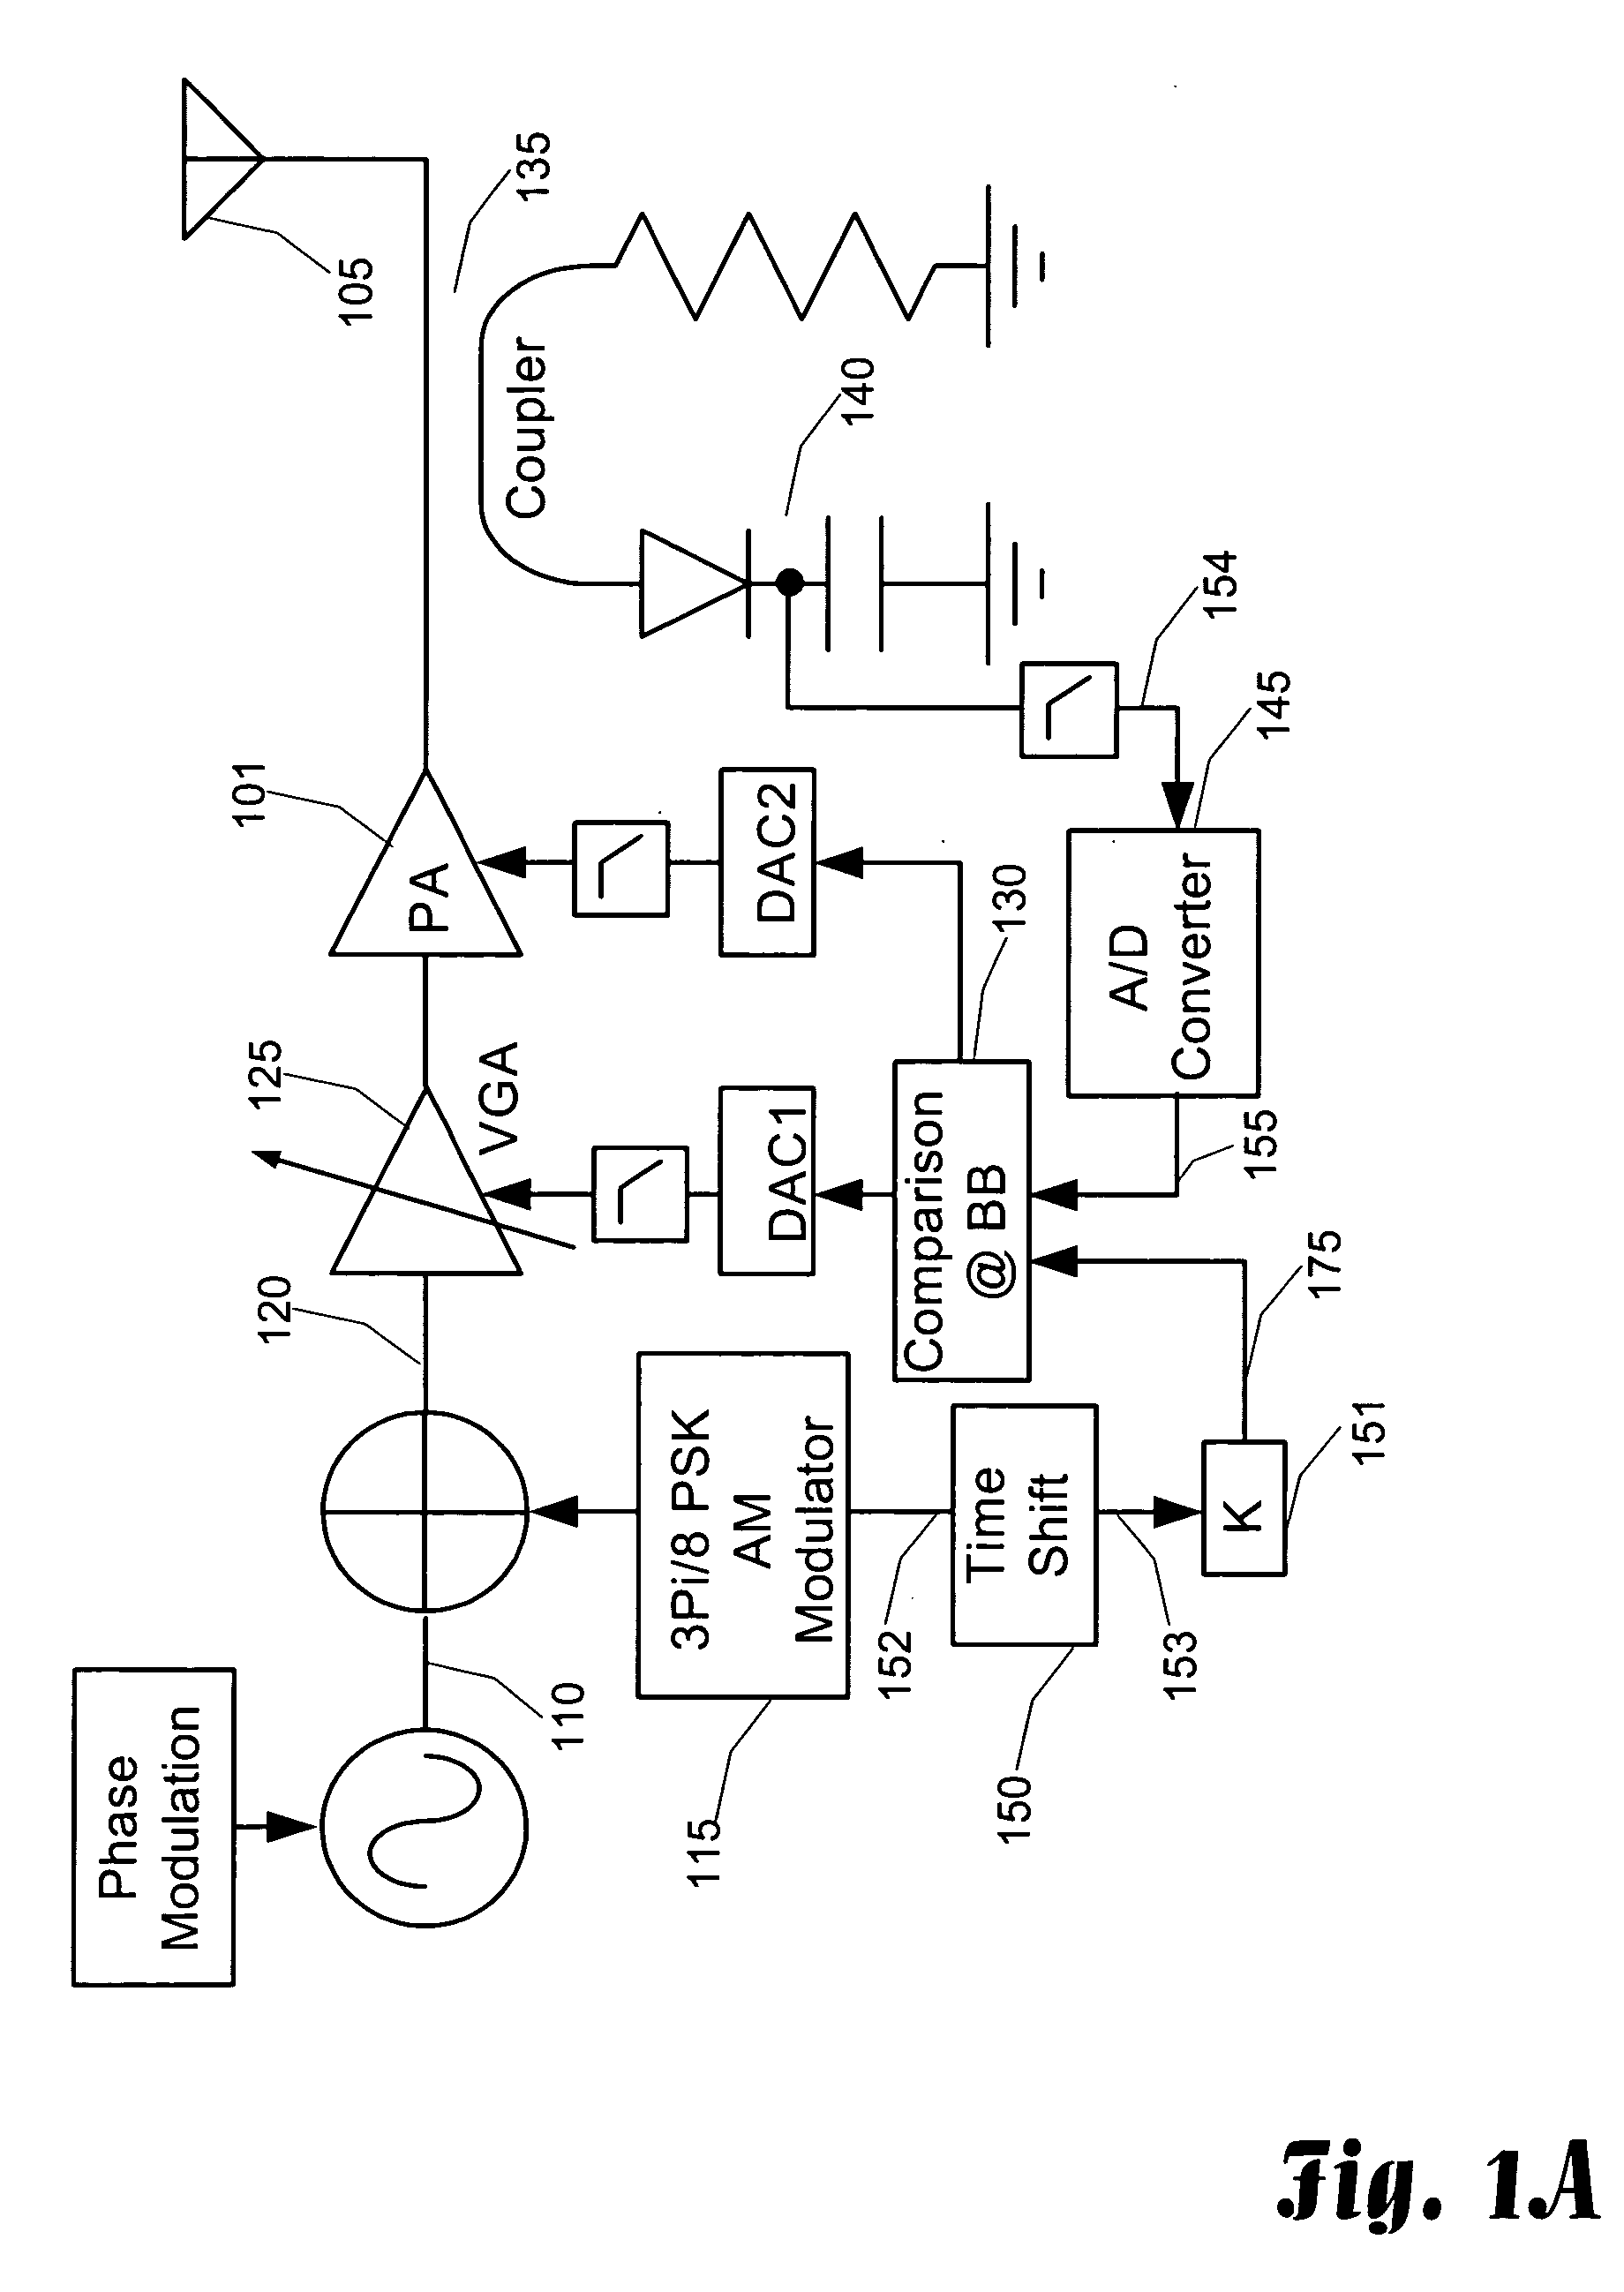 Detecting and maintaining linearity in a power amplifier system through envelope power comparisons